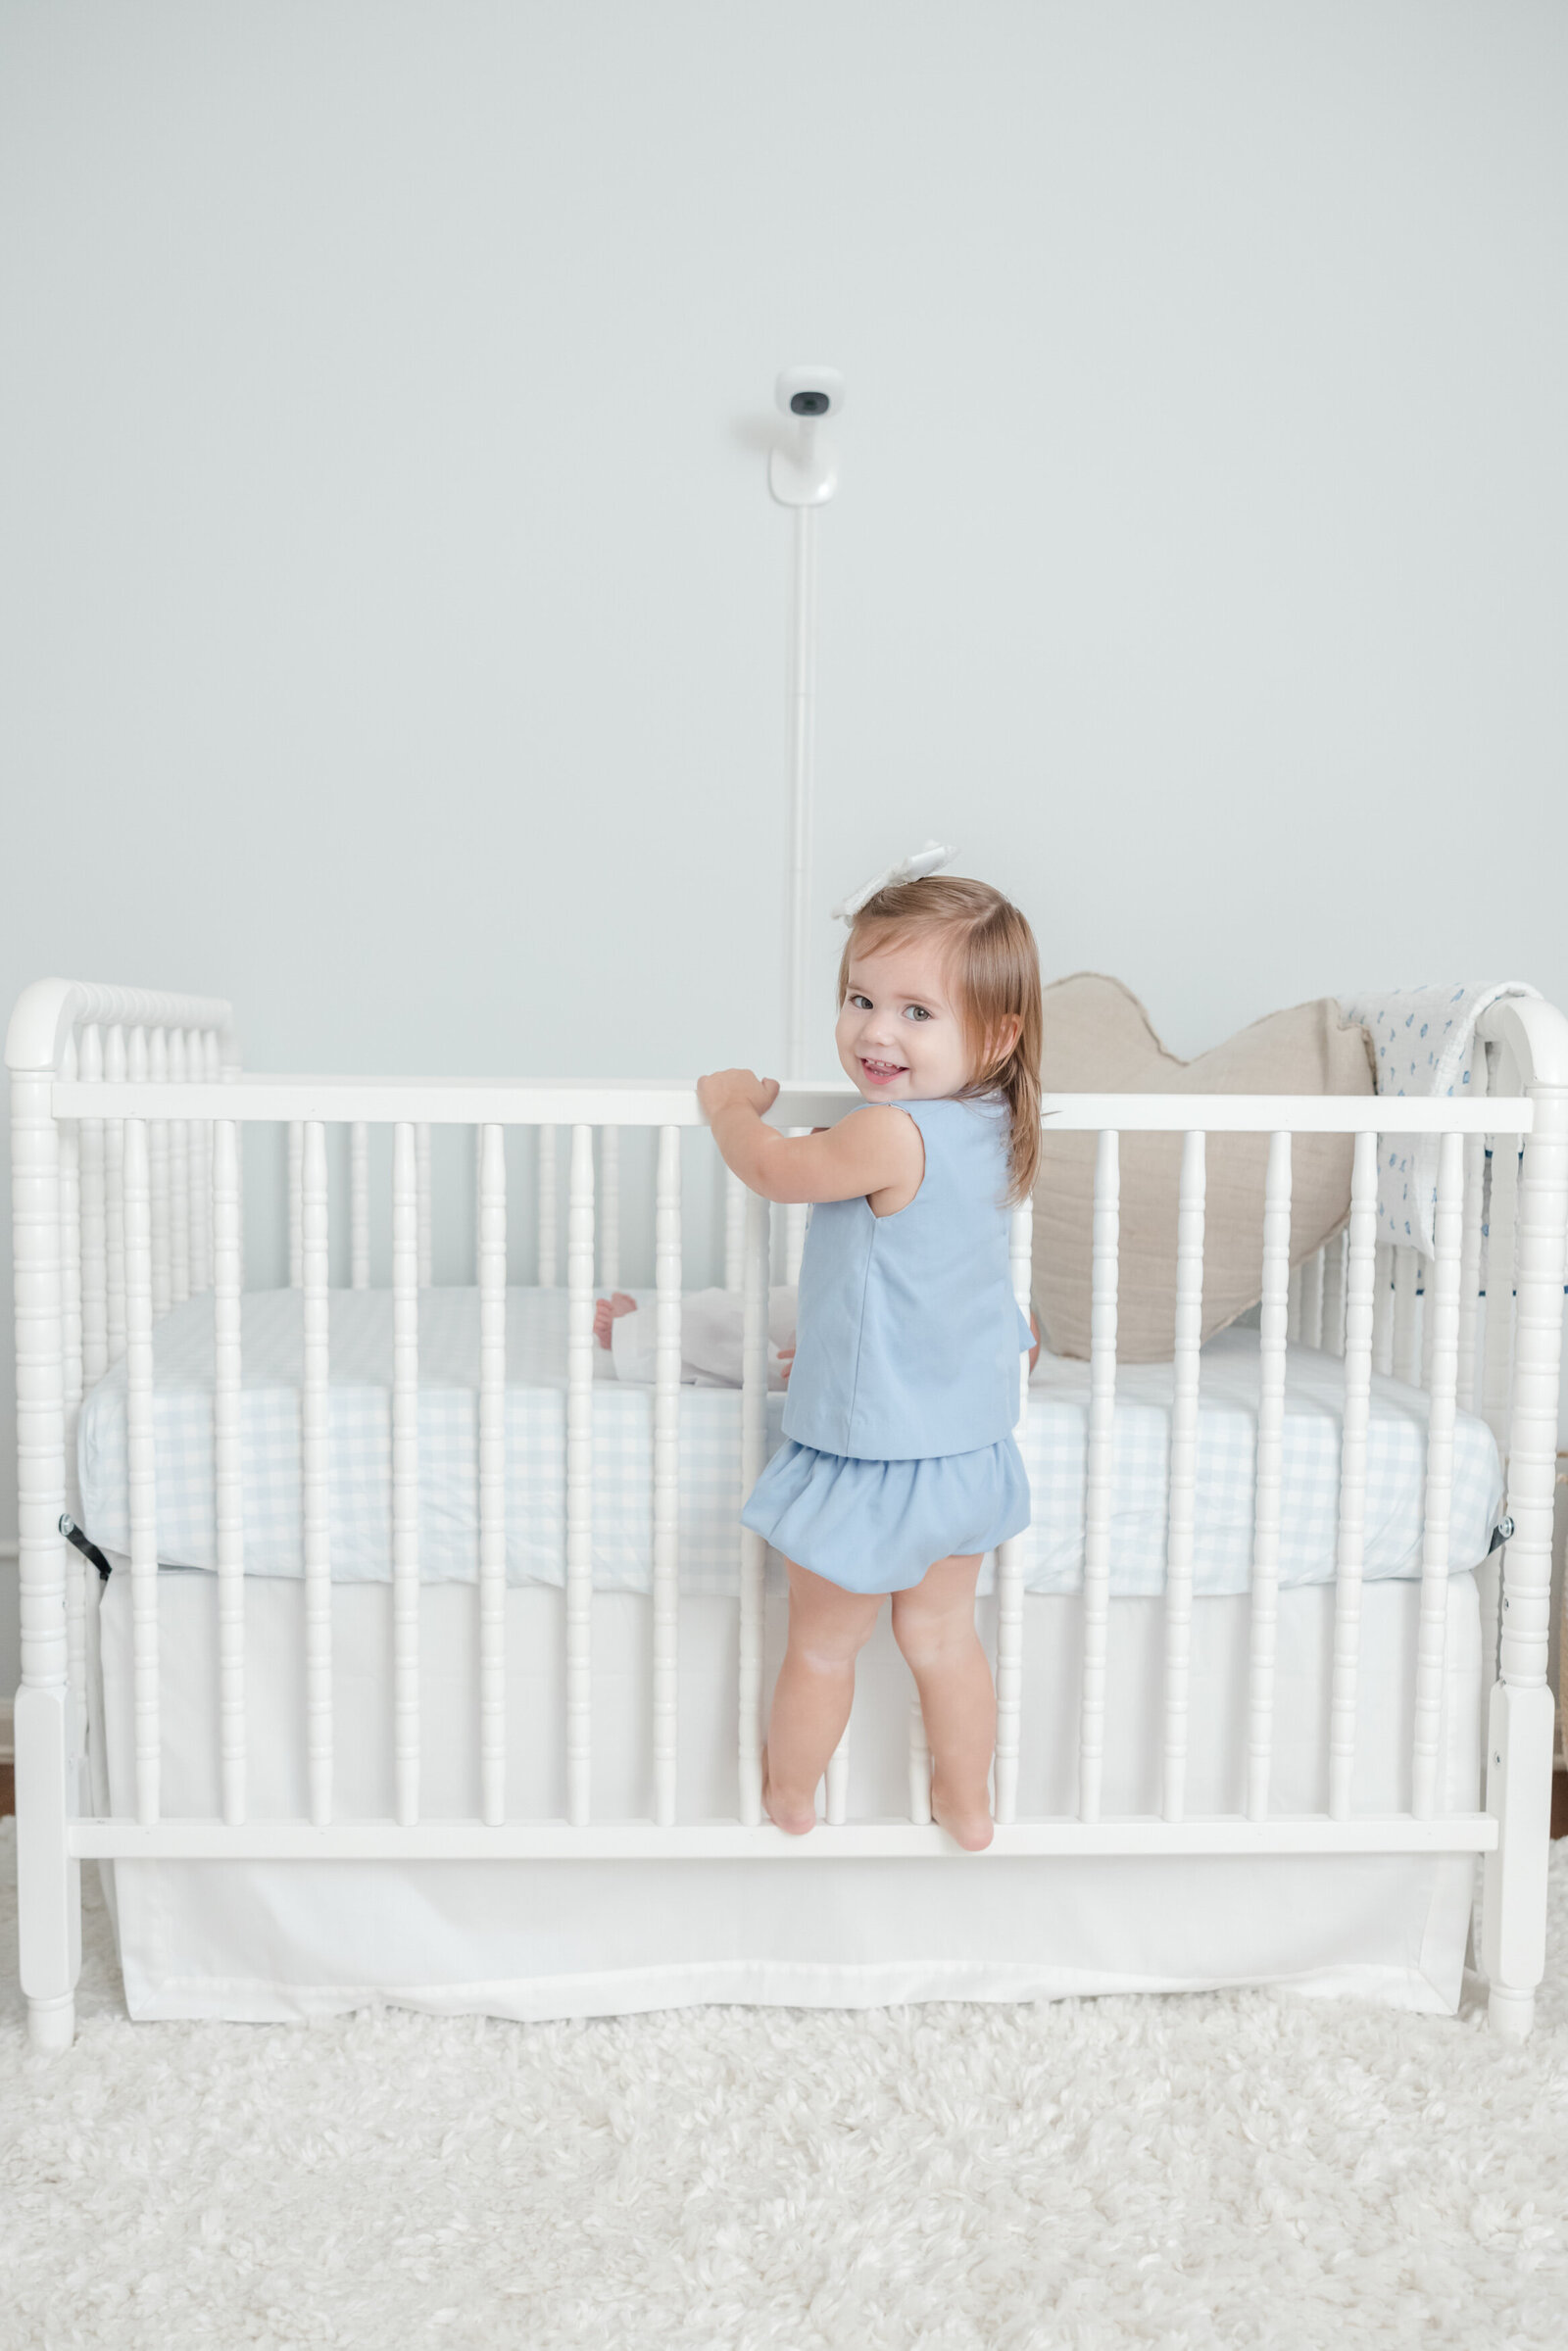 Toddler girl standing on side of a crib and smiling over her shoulder.